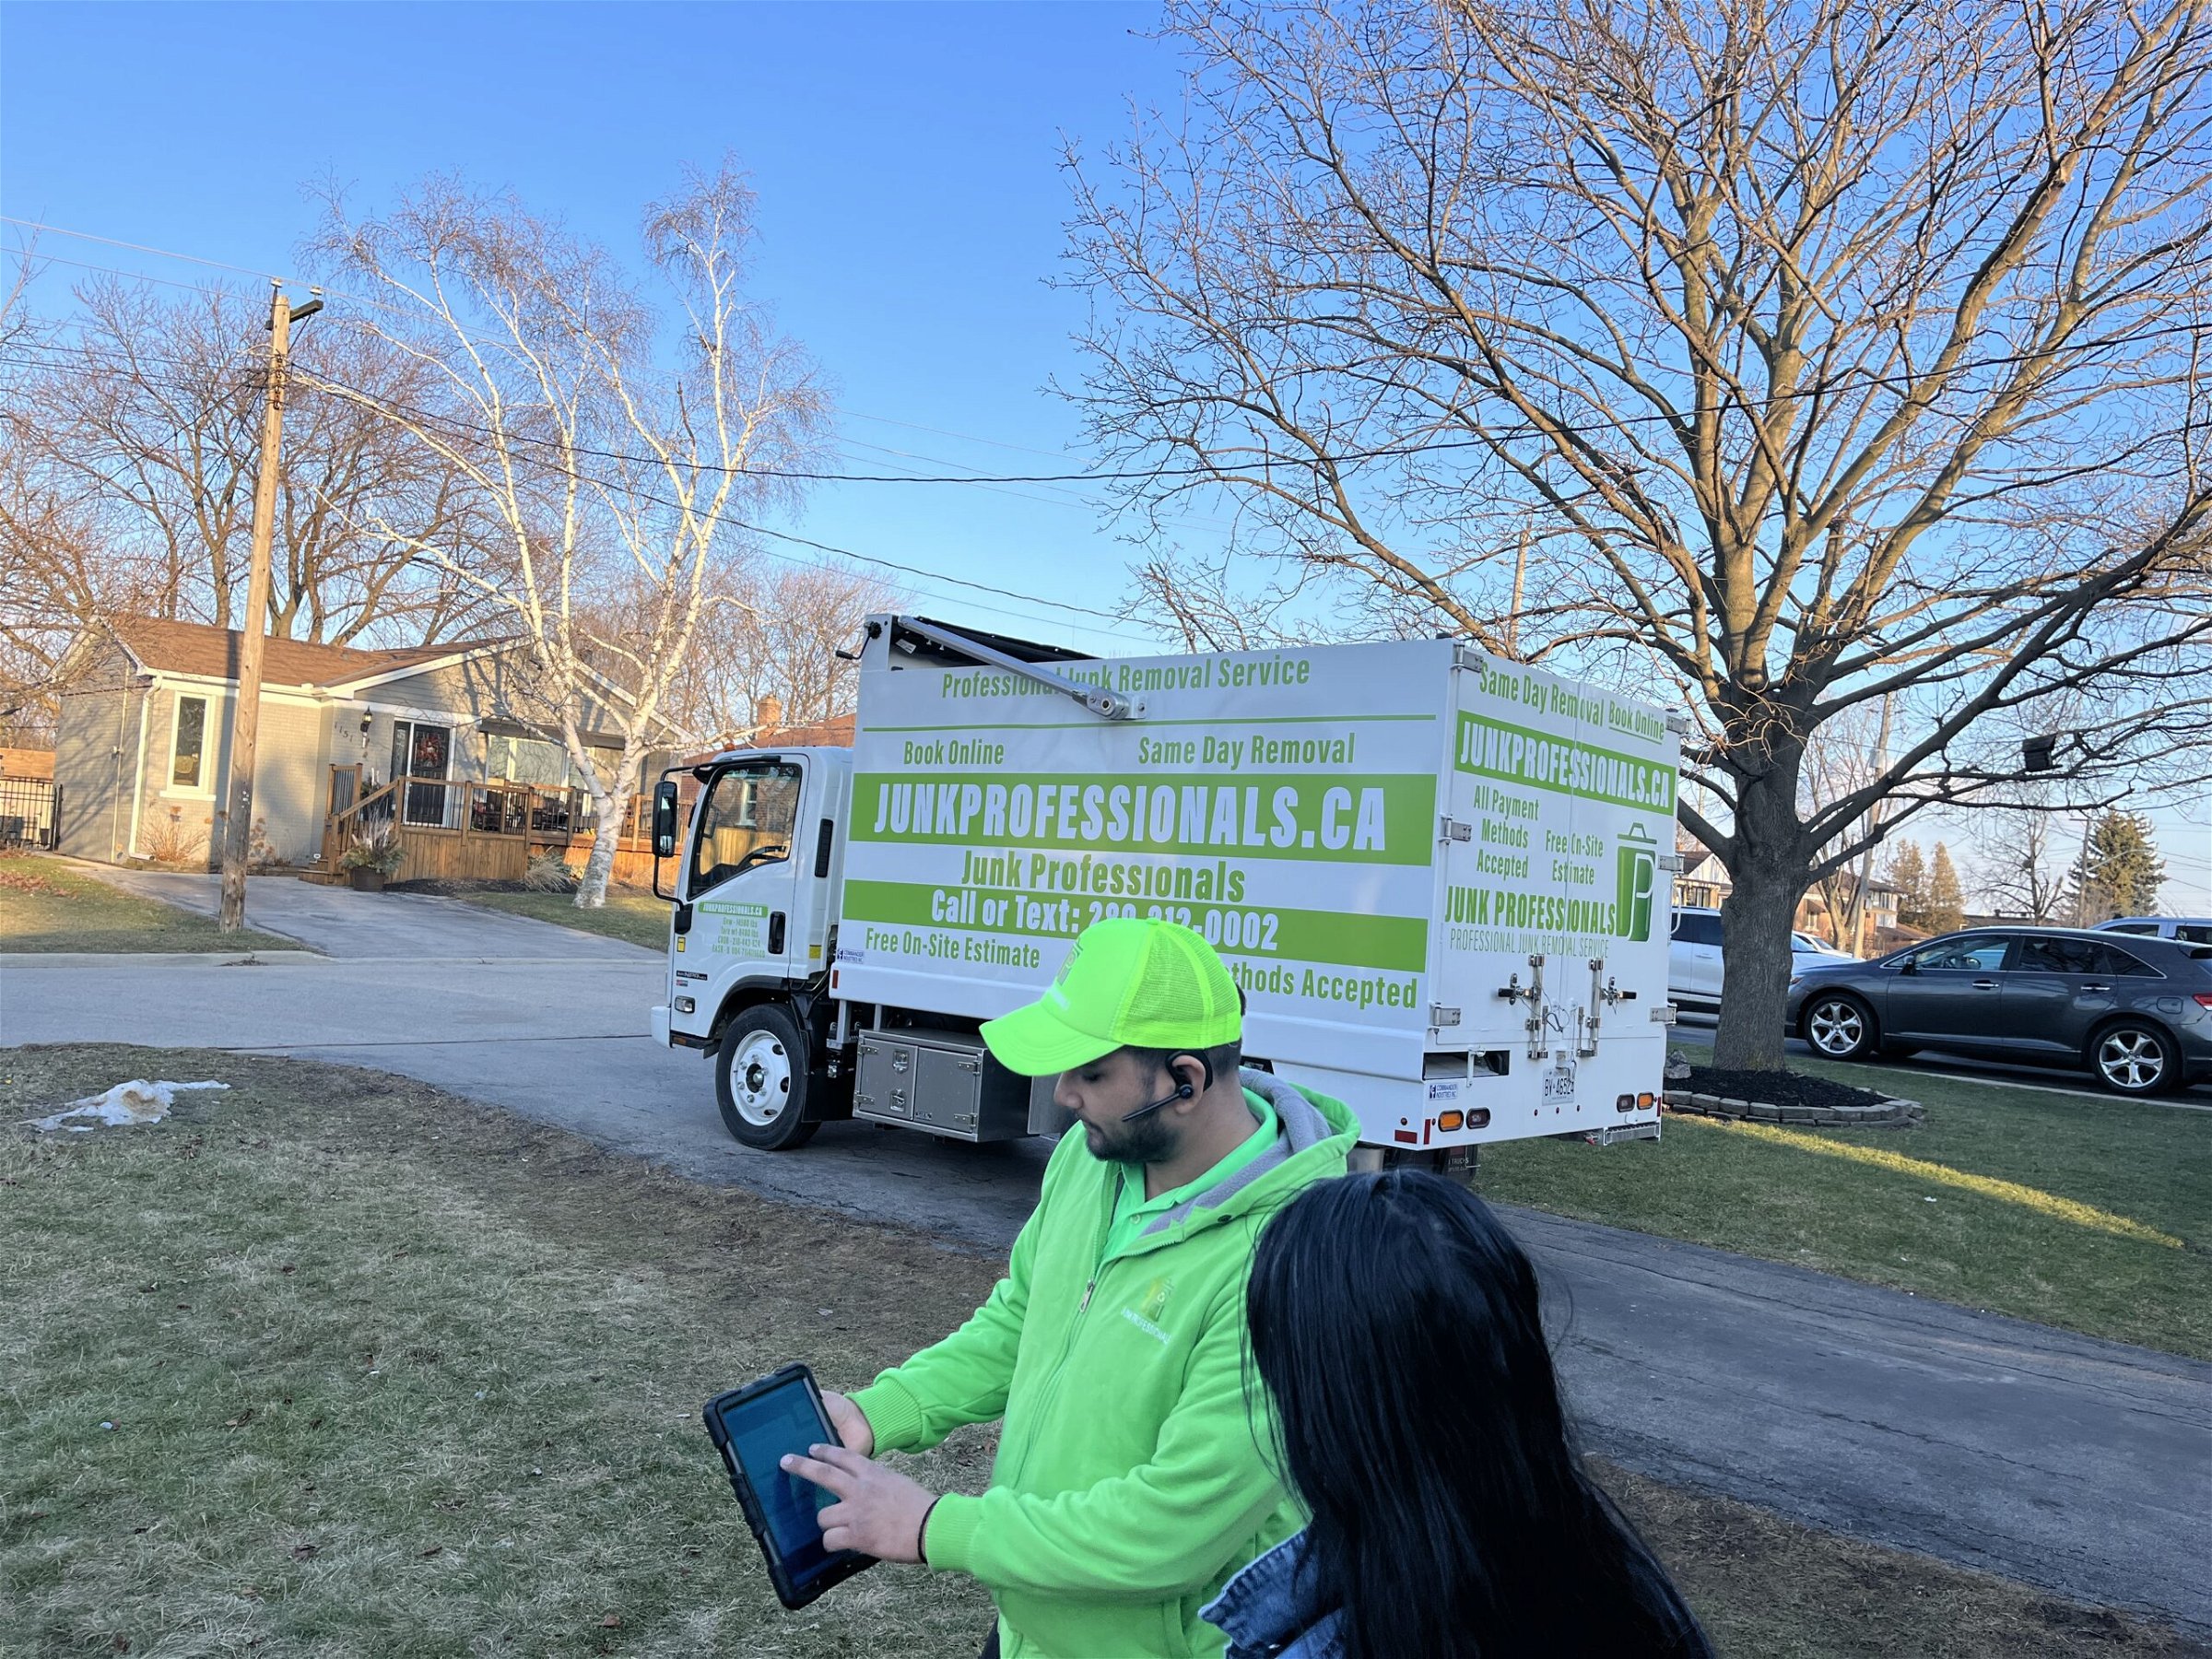 Junk Professionals team member showing price to a women for junk removal service.